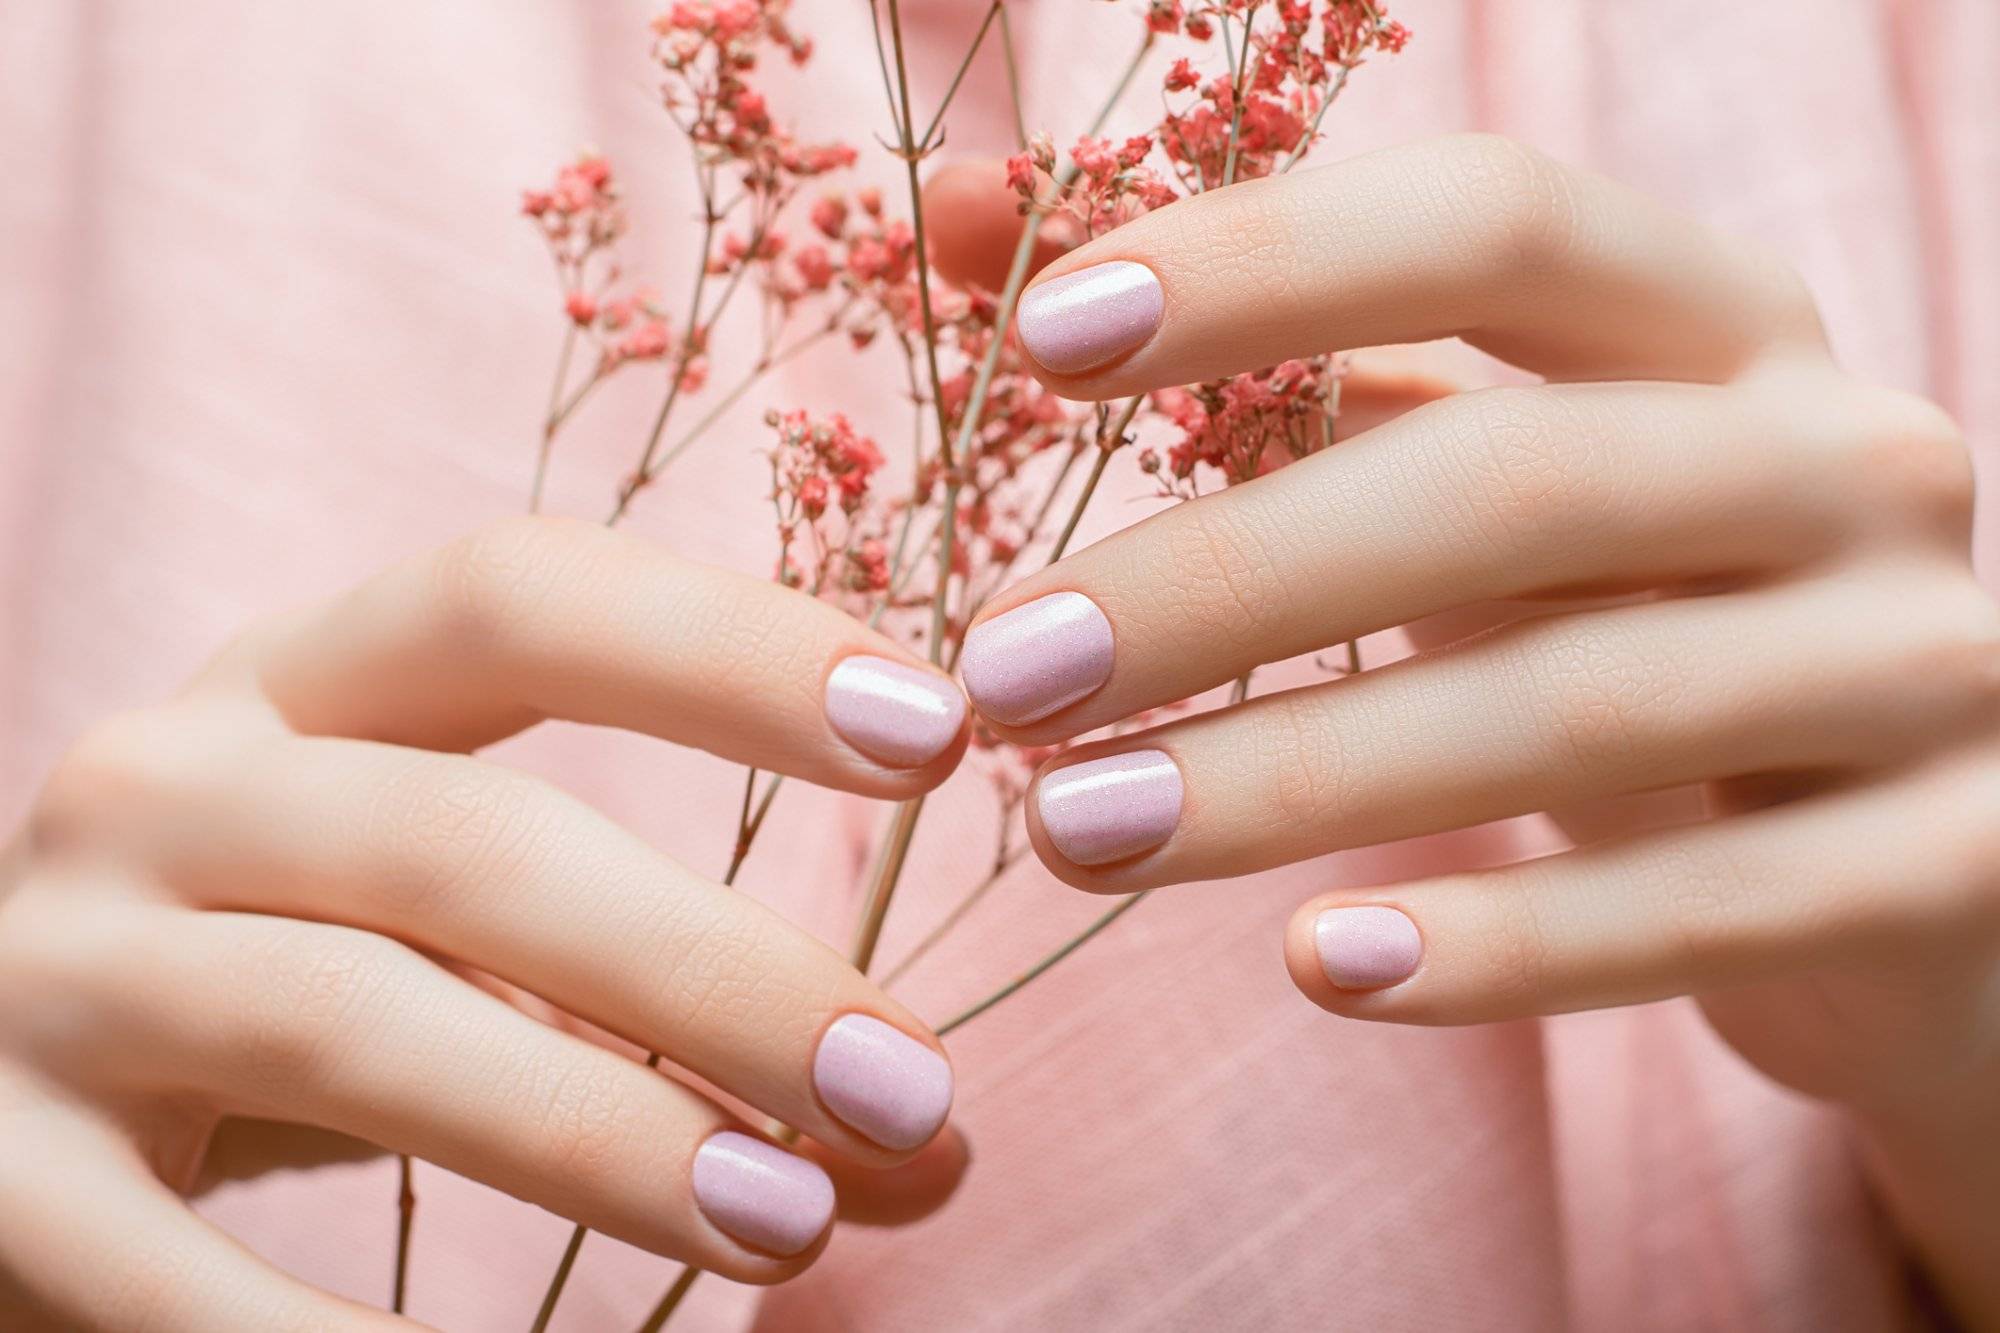 Pamper Yourself at The Best Pearland Nail Salon at Cullen Crossing